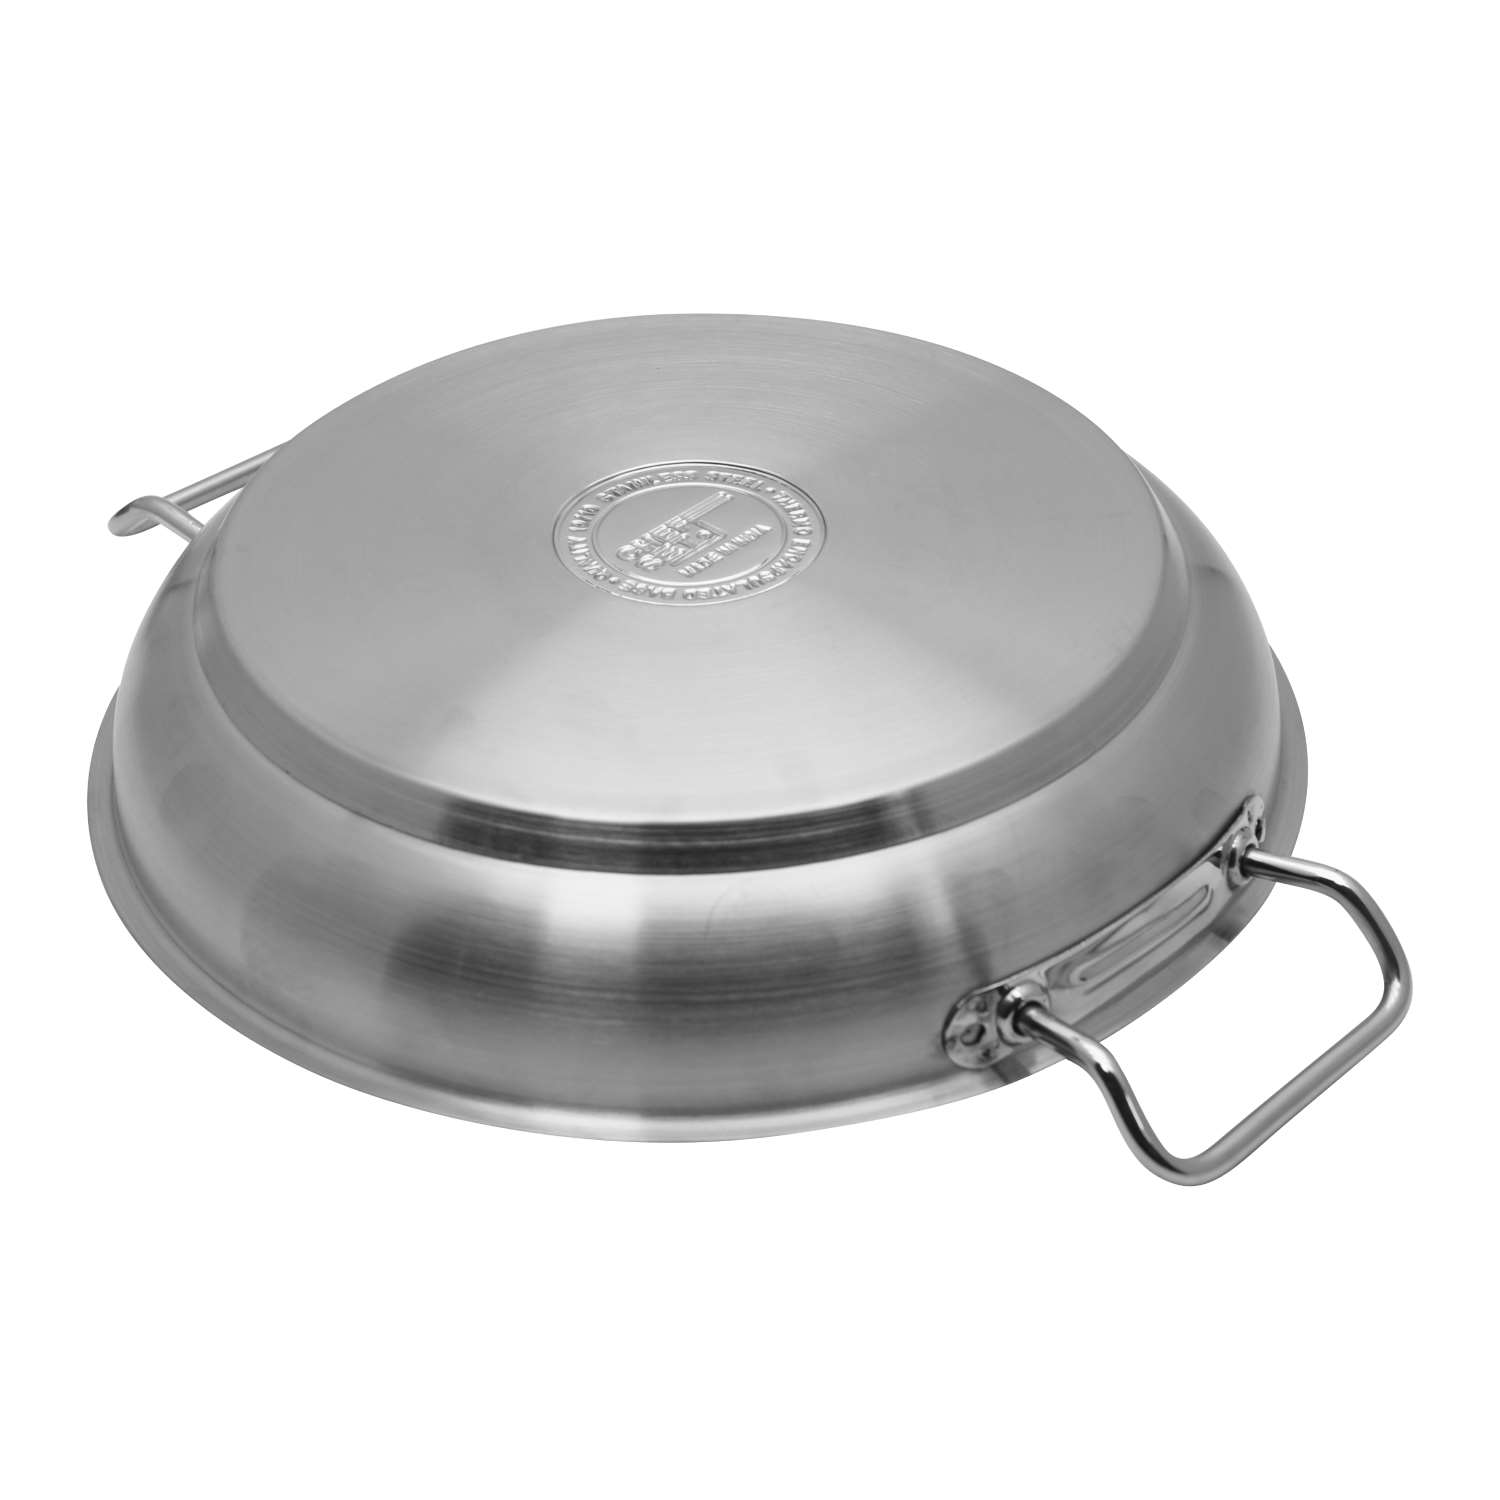 Chefset Steel Fry Pan With Side Handle 30Cm